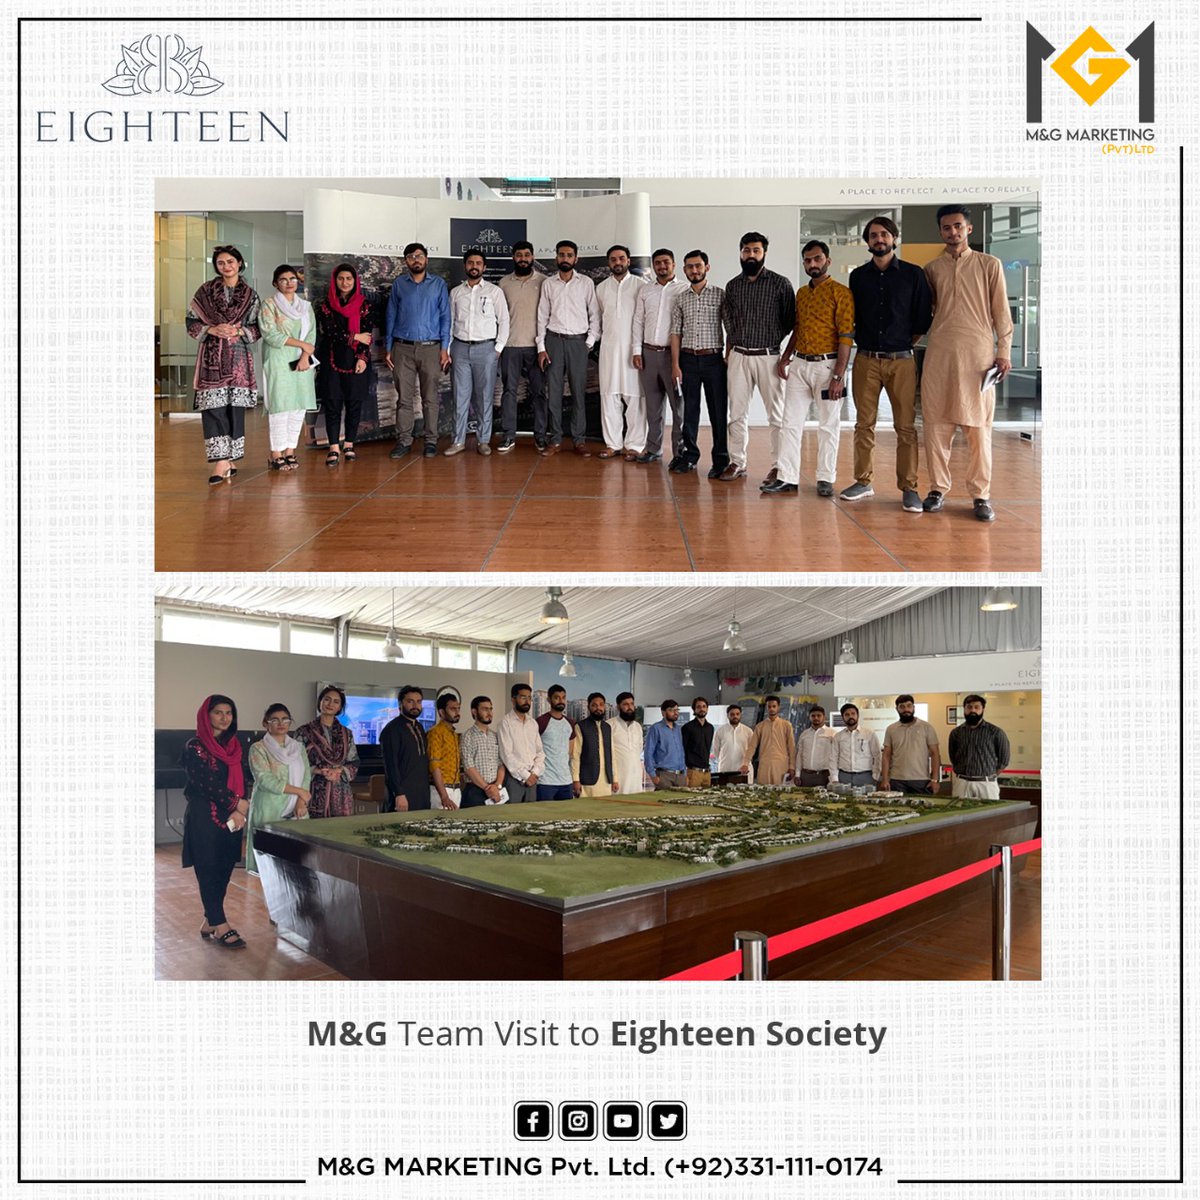 Team M&G Visited Eighteen Society on 7th June 2022 and Sales Manager gave the briefing regarding development of society, amenities offered, and Master Plan Roadmap.
 
#eighteen #marketing #sales #house #realestate #projectbriefing